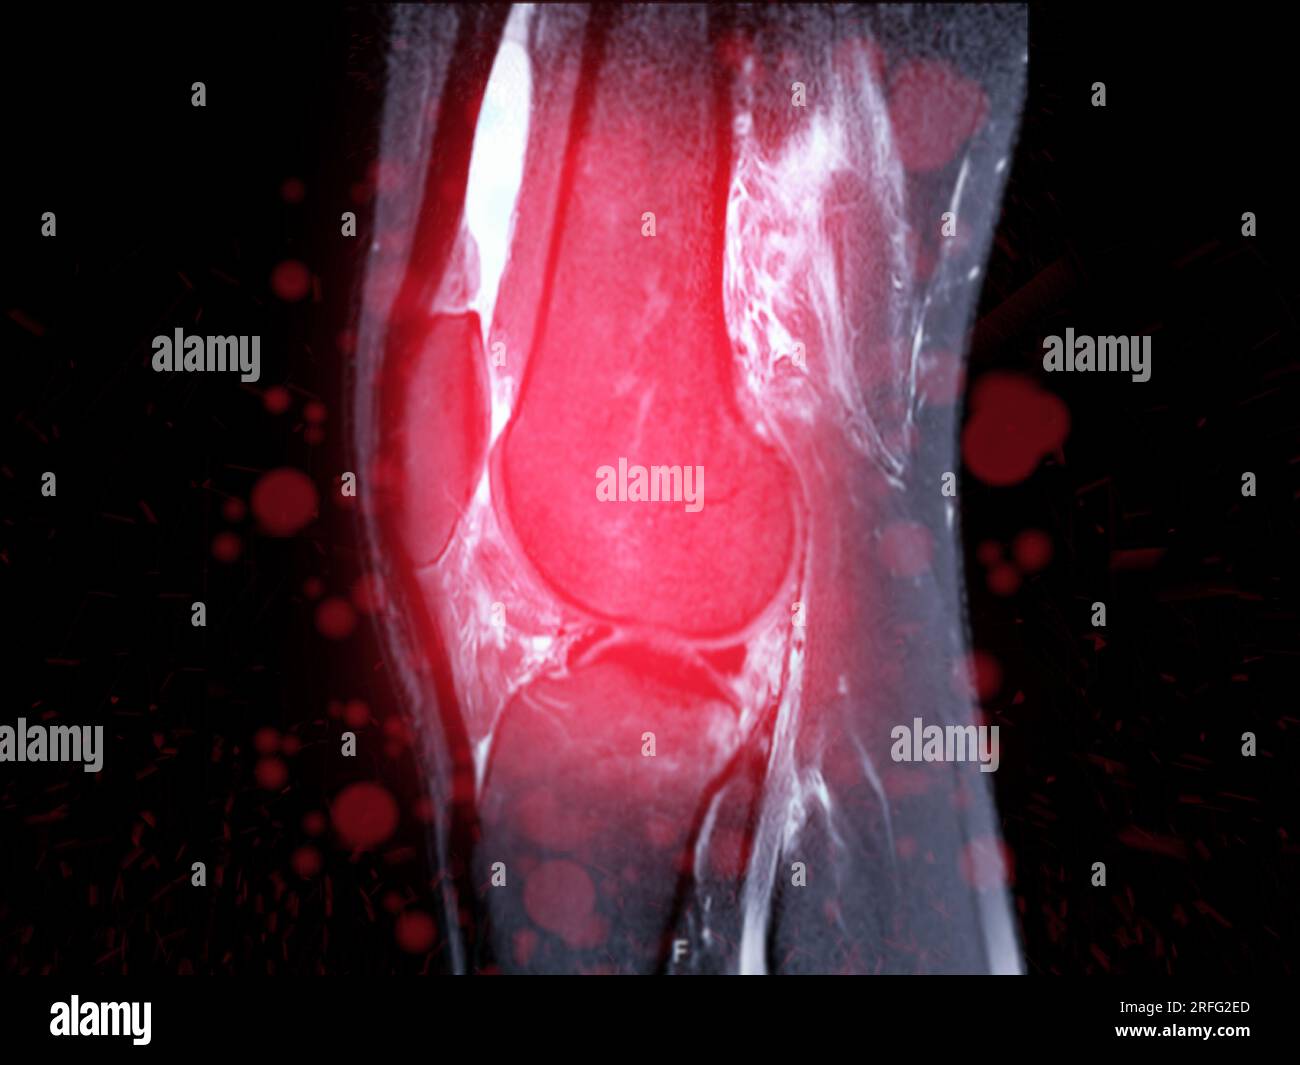 Magnetic resonance imaging or MRI of  knee joint Sagittal T2 FS for detect tear or sprain of the anterior cruciate  ligament (ACL) Stock Photo